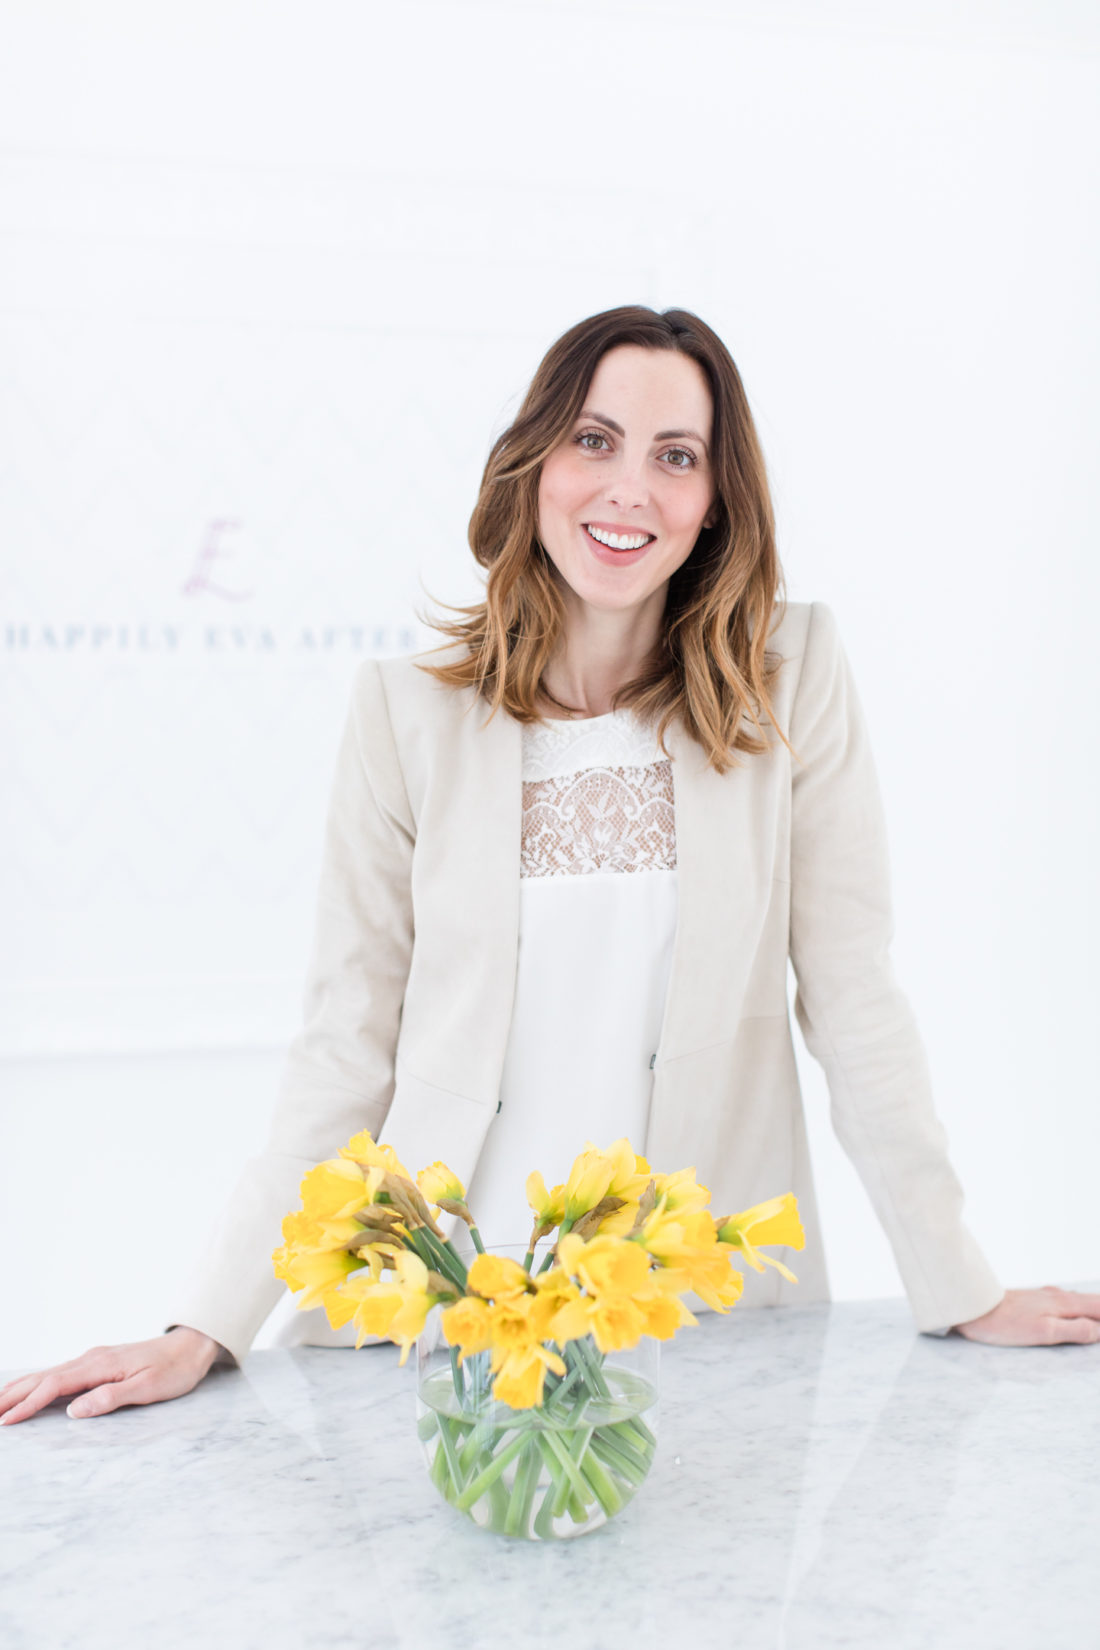 Eva Amurri Martino wears a white camisole top and tan blazer, and stands in the happily eva after studio with a bowl of daffodils